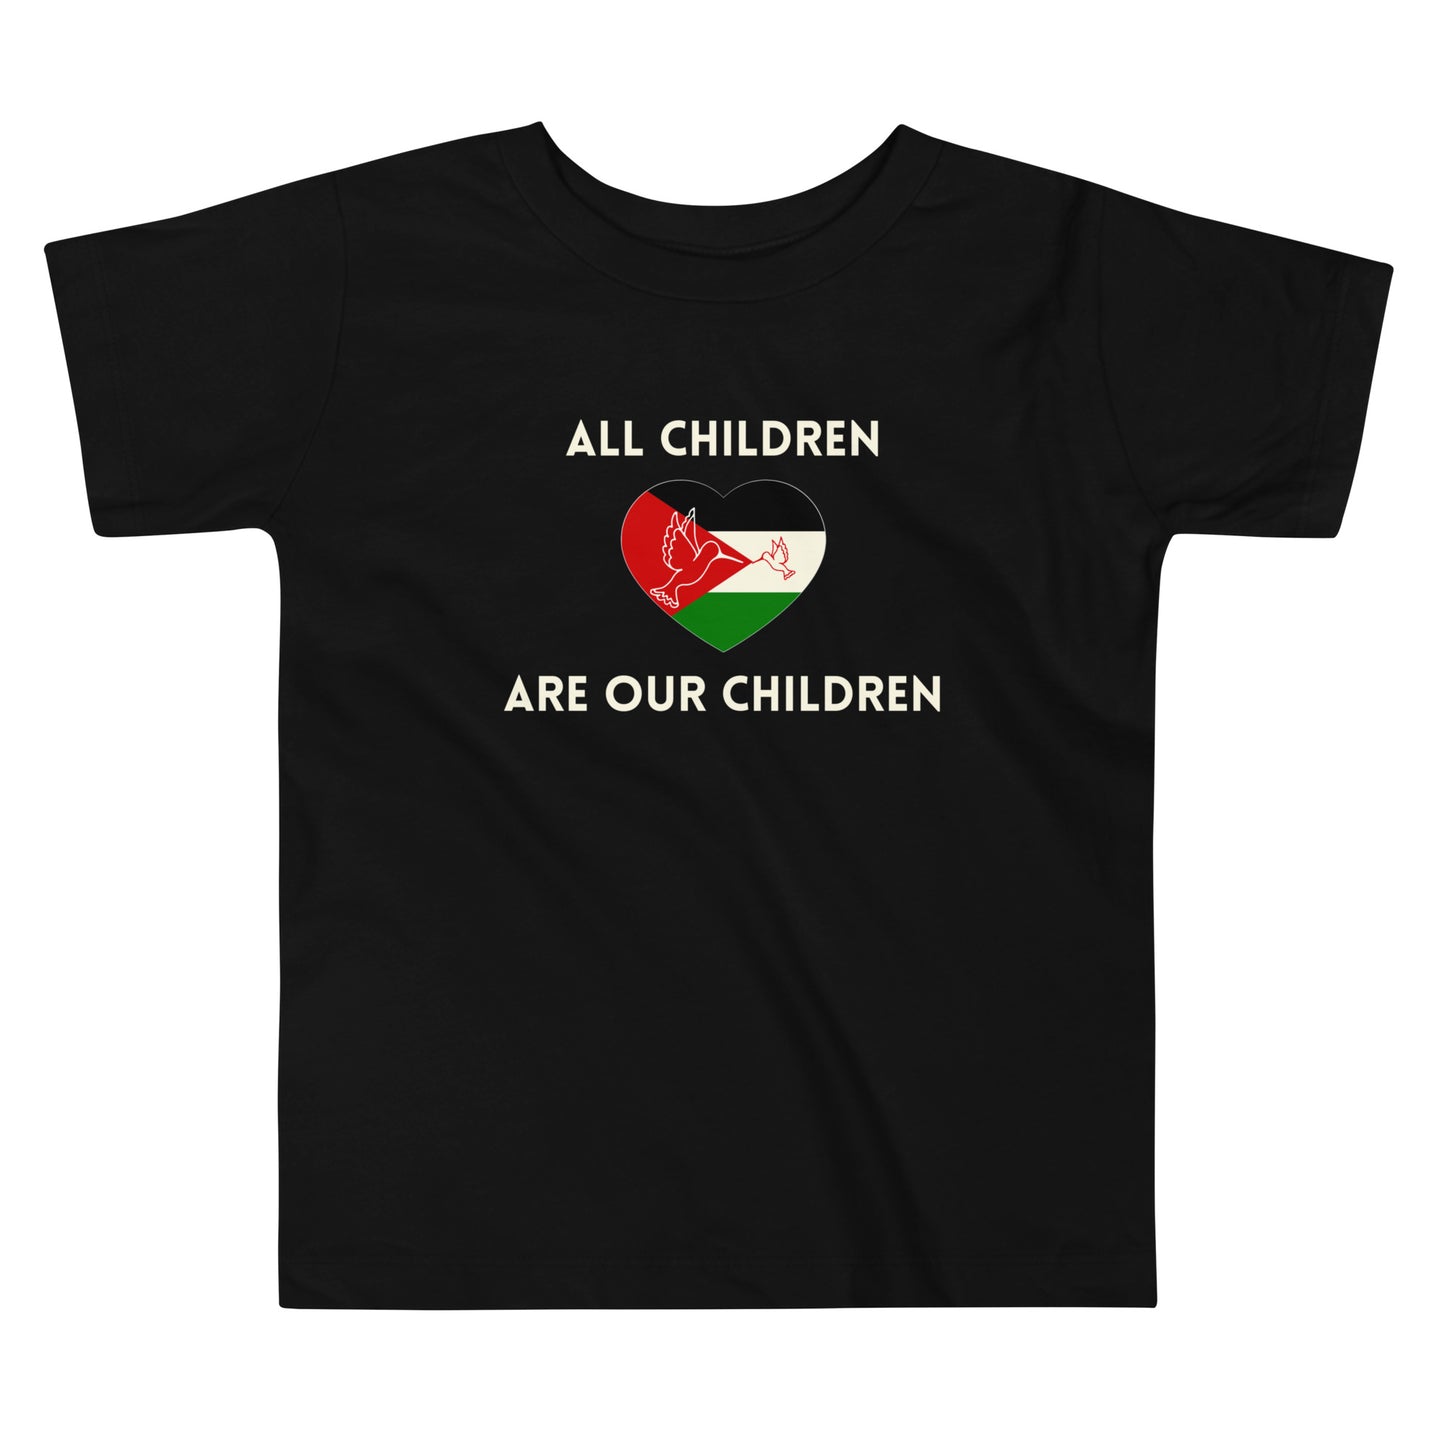 All Children Are Our Children <3 Toddler Tee Black